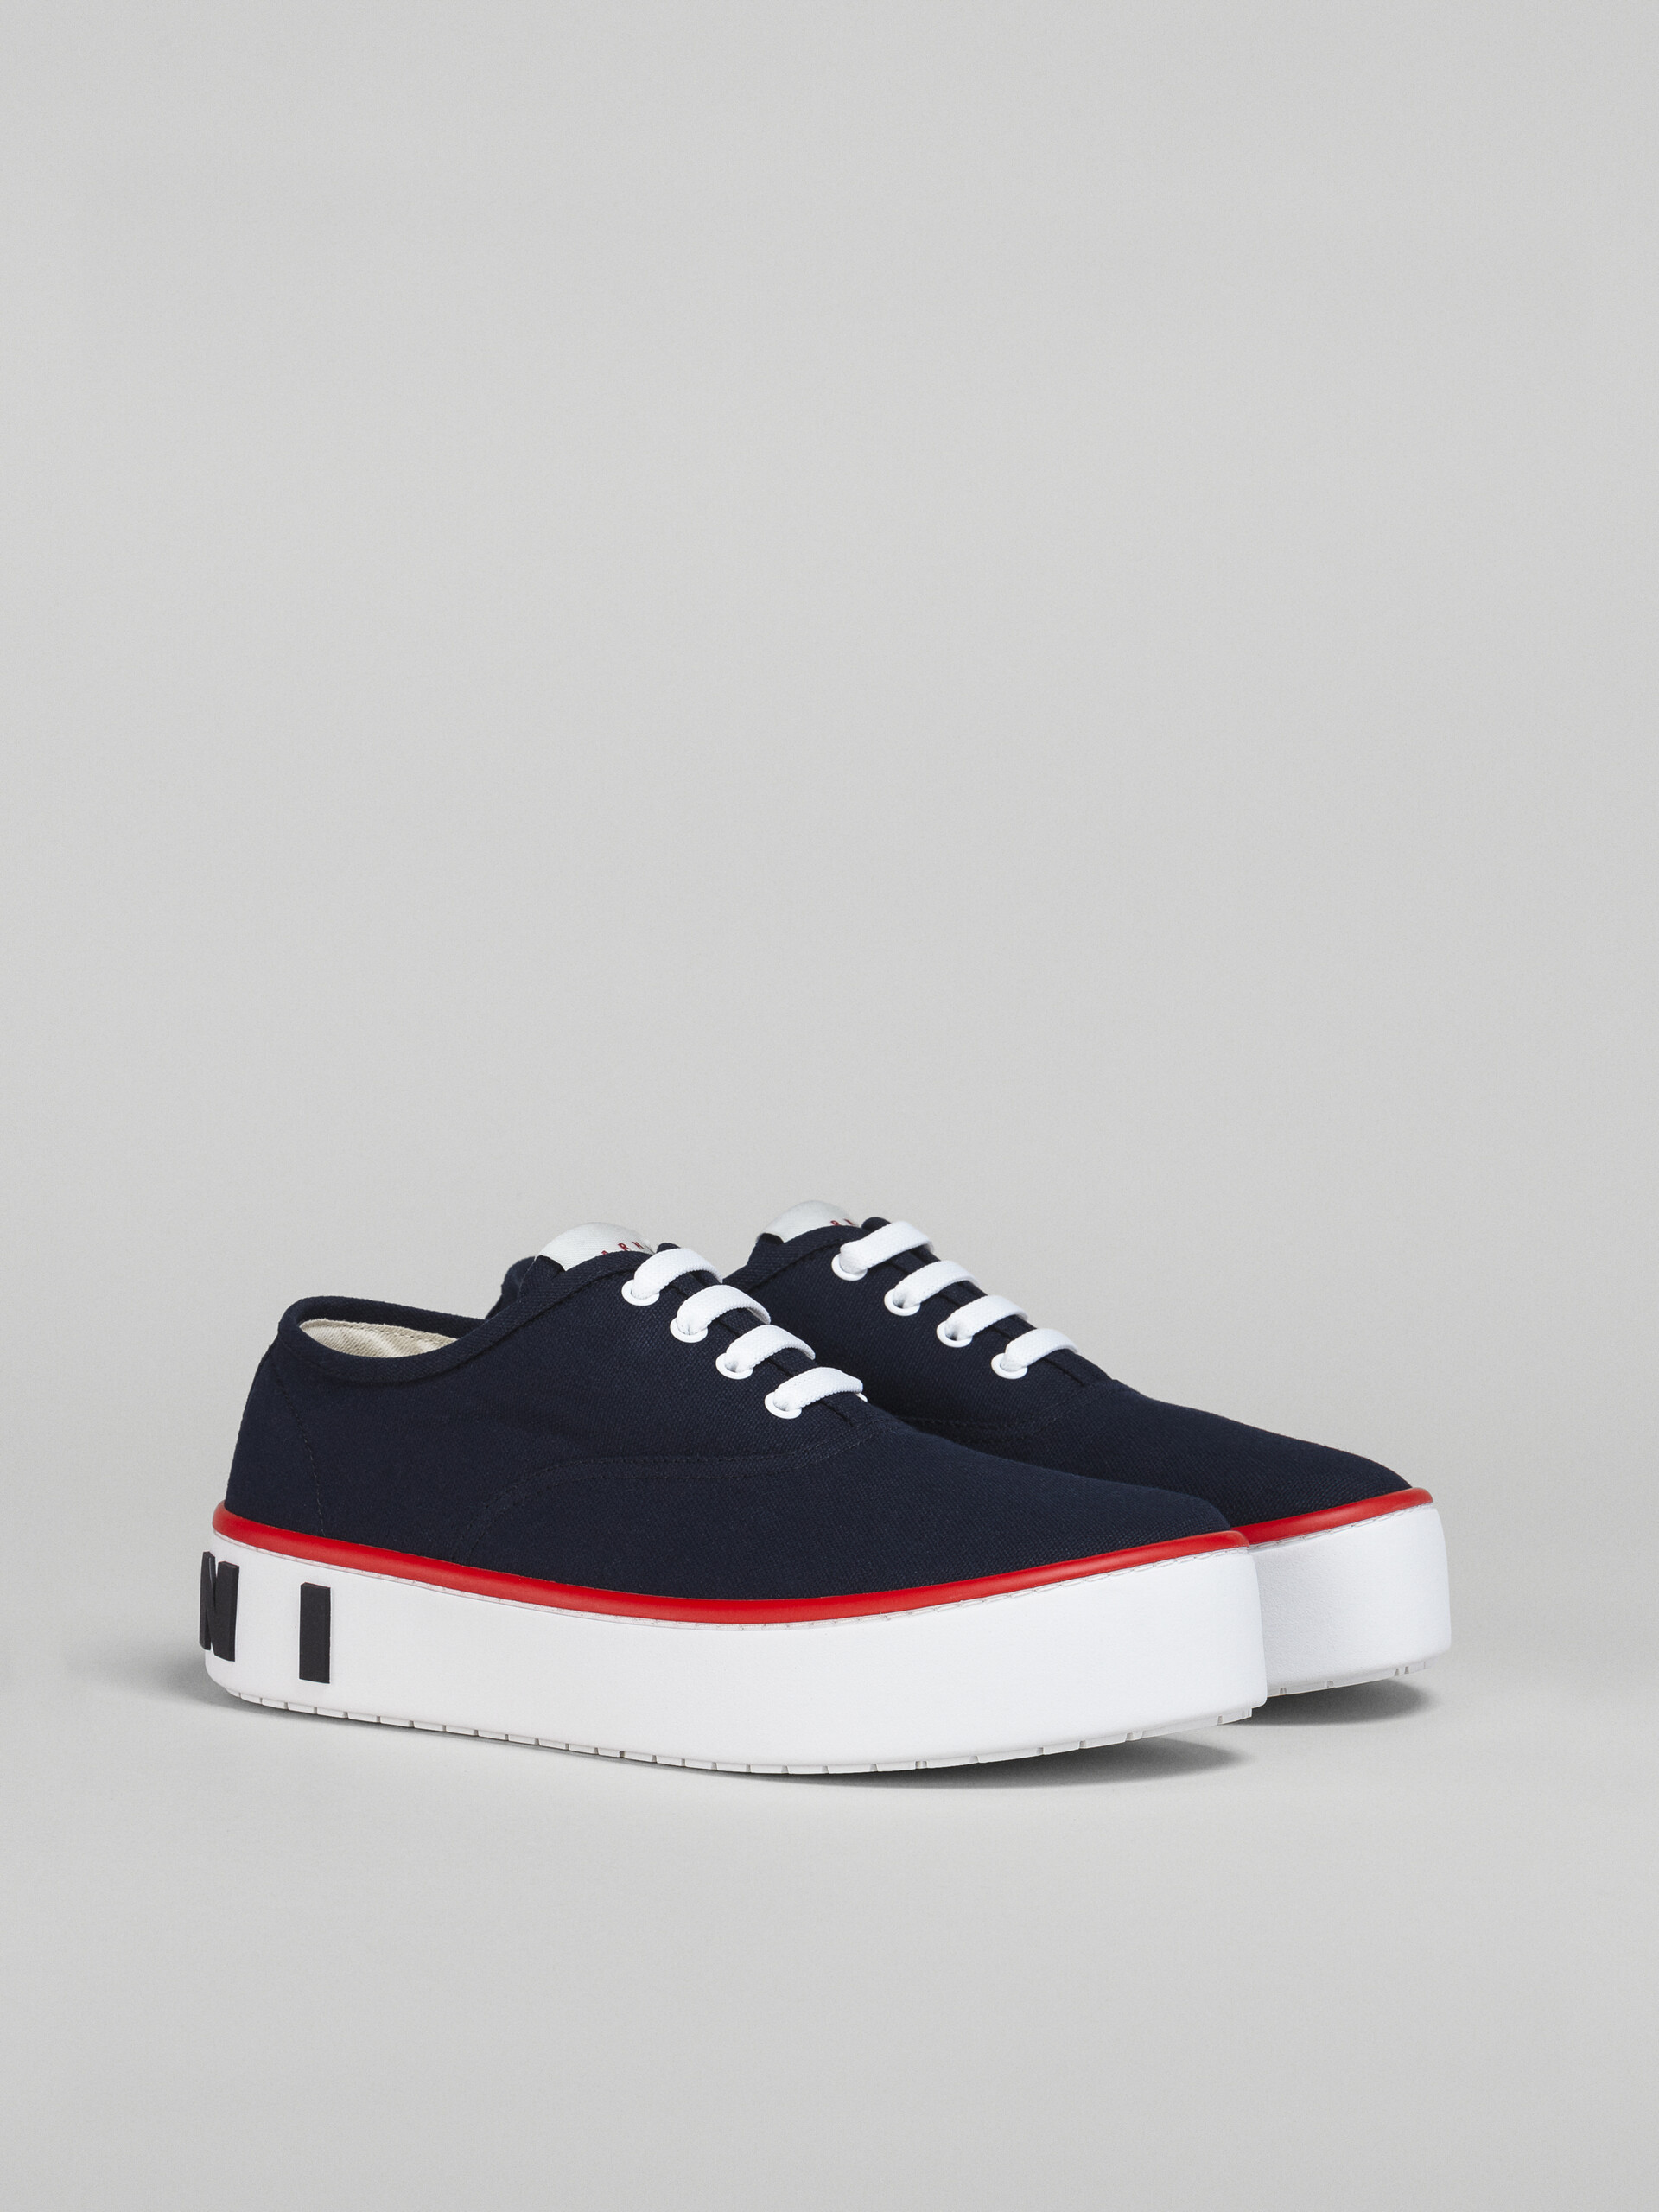 Blue canvas sneaker with maxi logo - Sneakers - Image 2